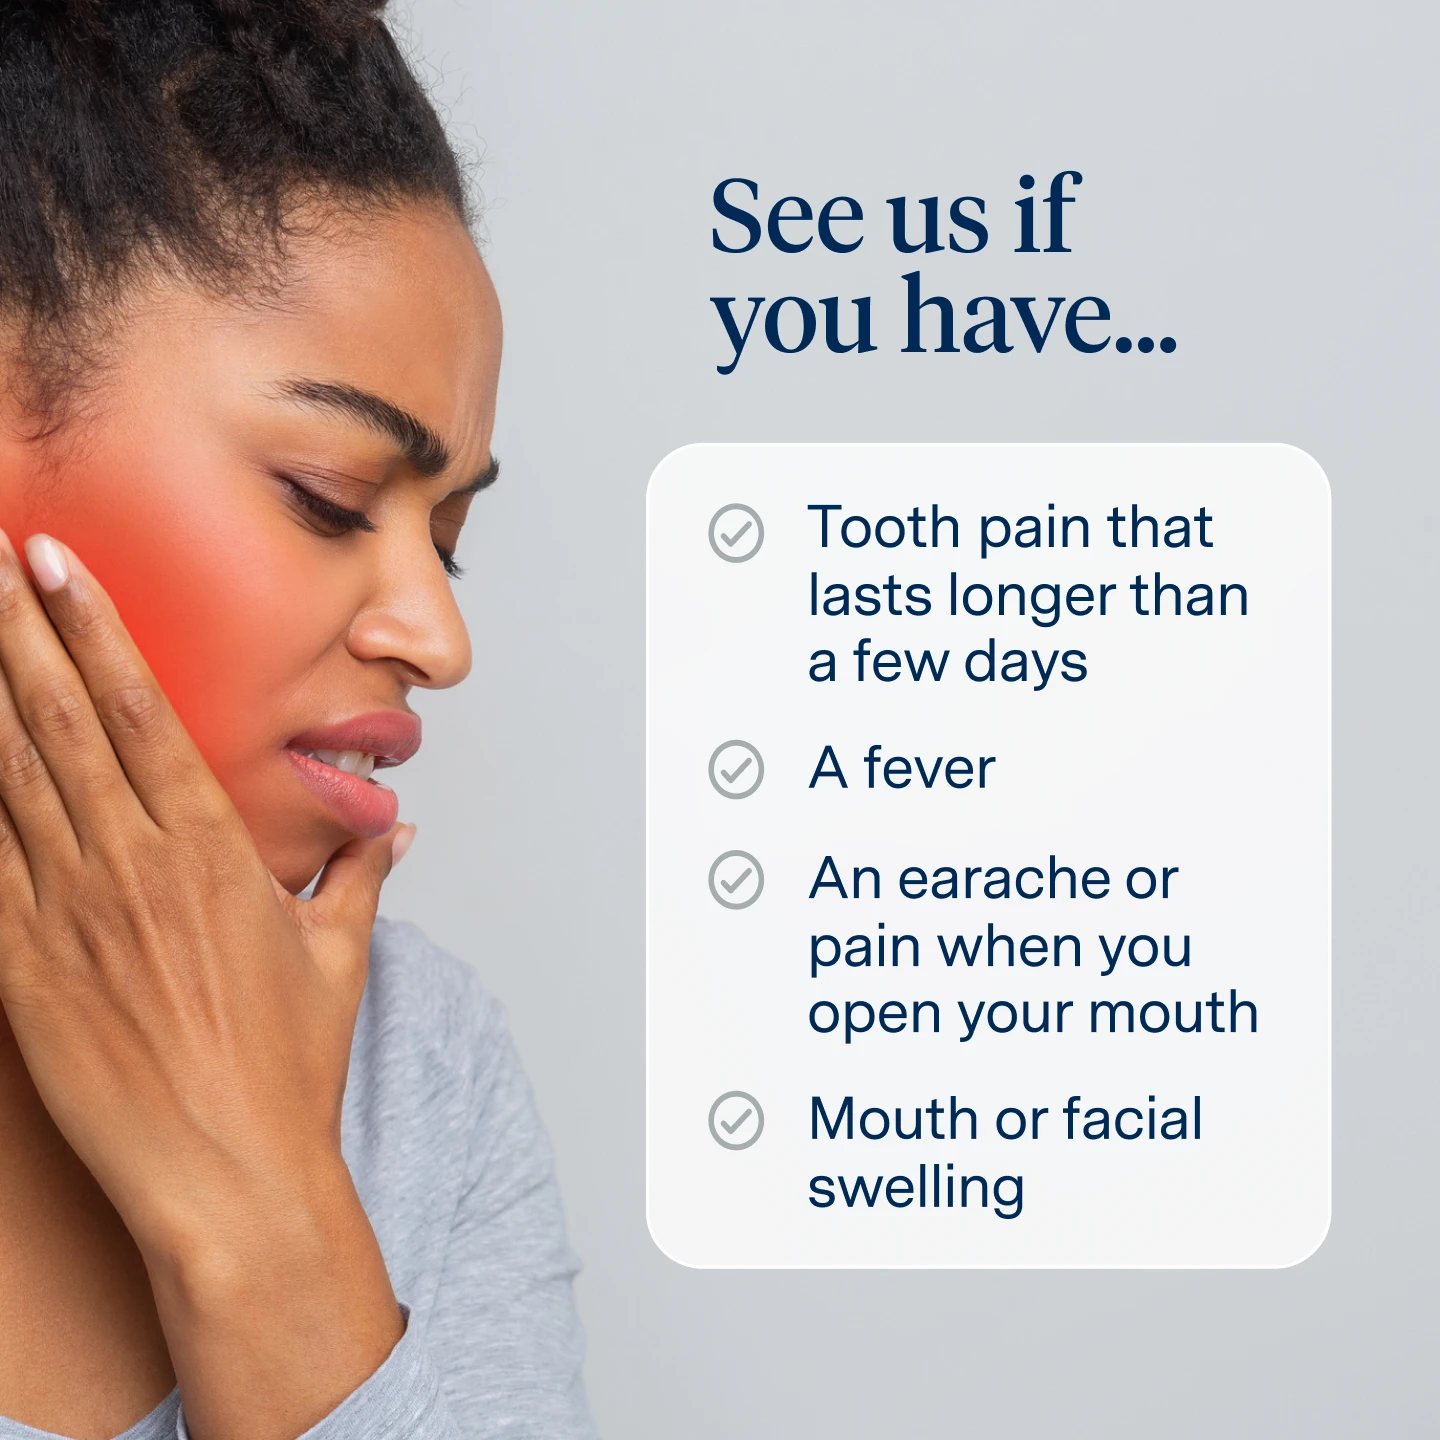 Seek toothache treatment if you're experiencing tooth pain that lasts longer than a few days, a fever, an earache or pain when you open your mouth, or mouth/facial swelling from your toothache.